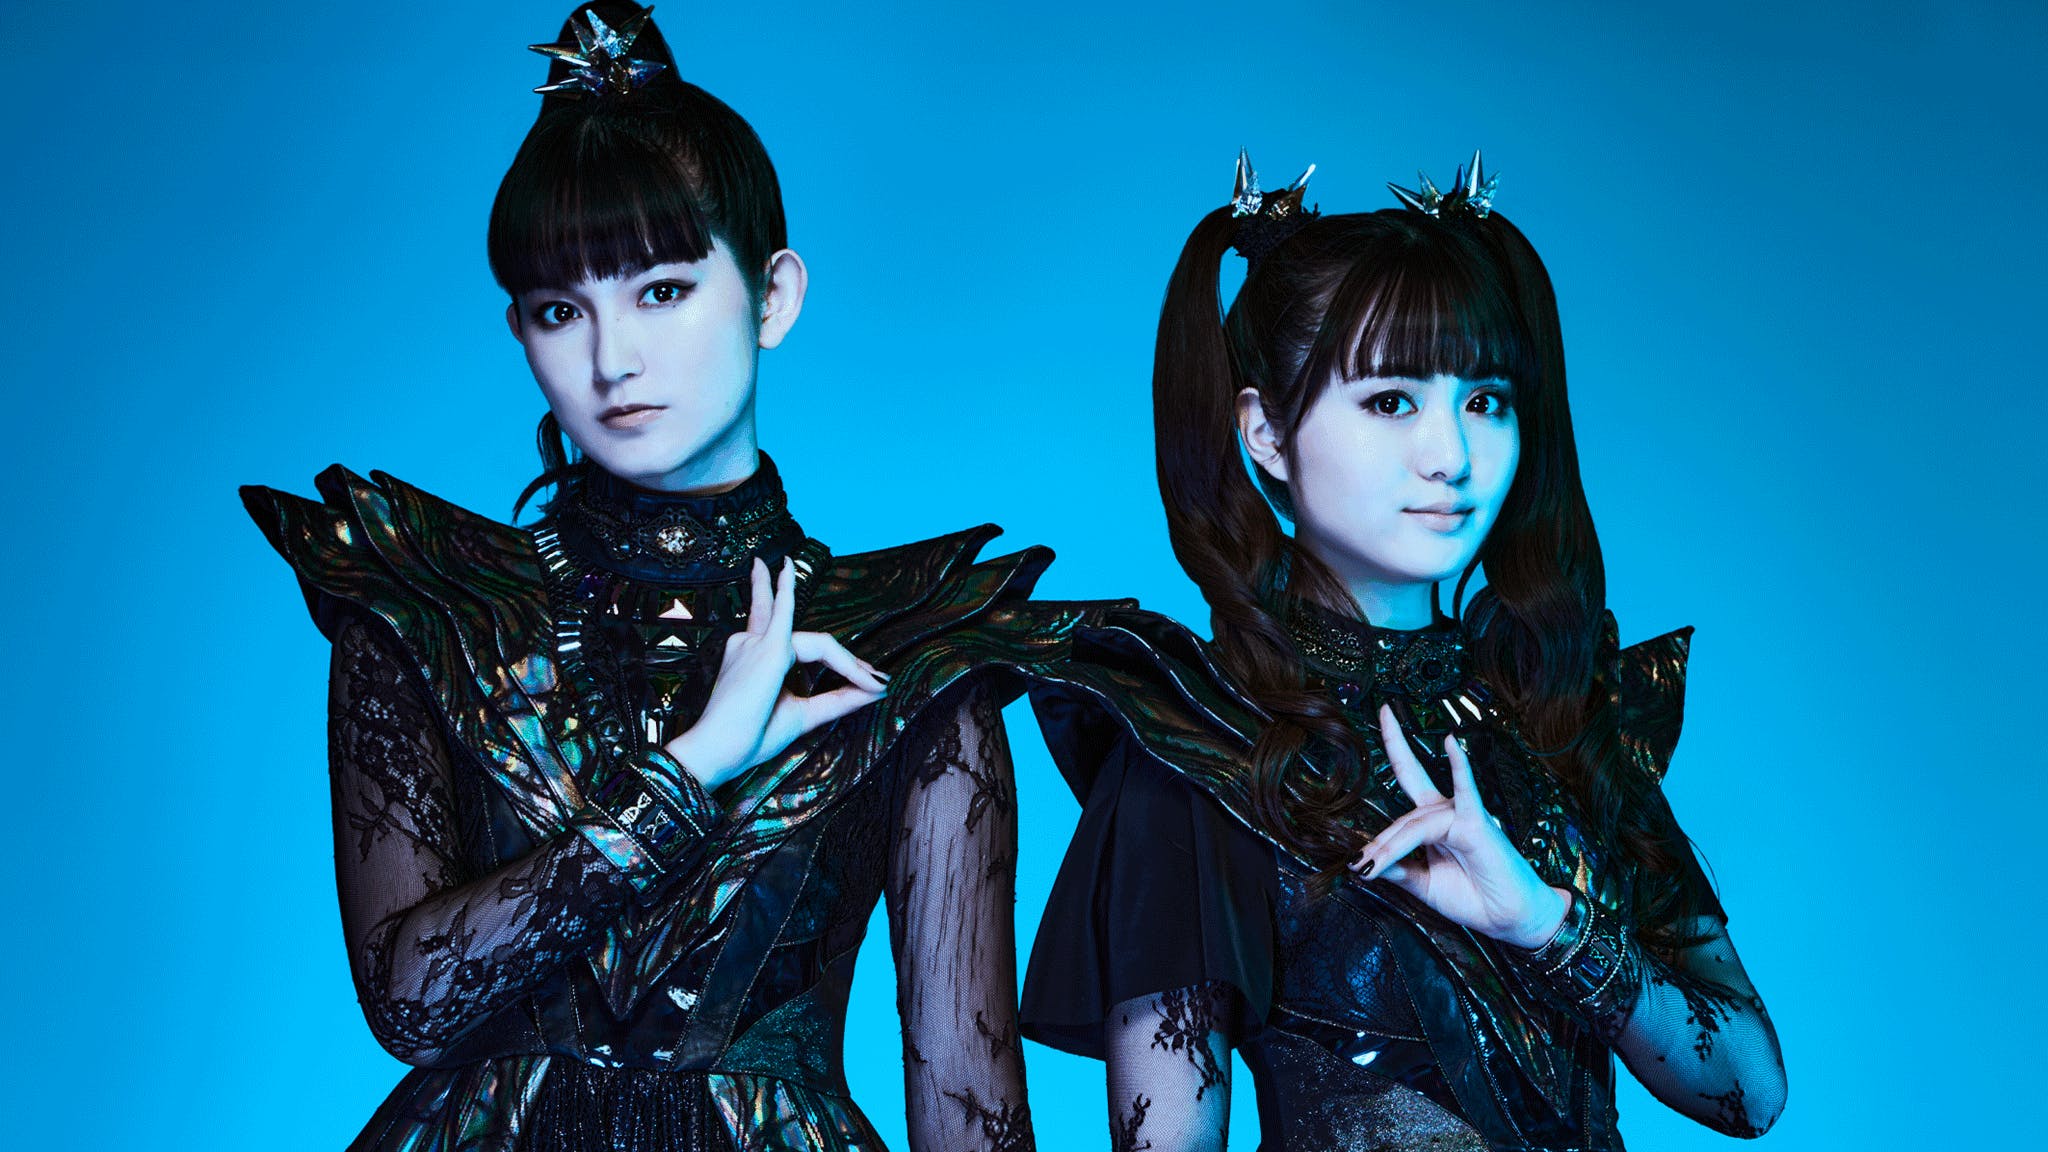 BABYMETAL: “We plan to start a new journey… I can’t wait to see what the future holds”